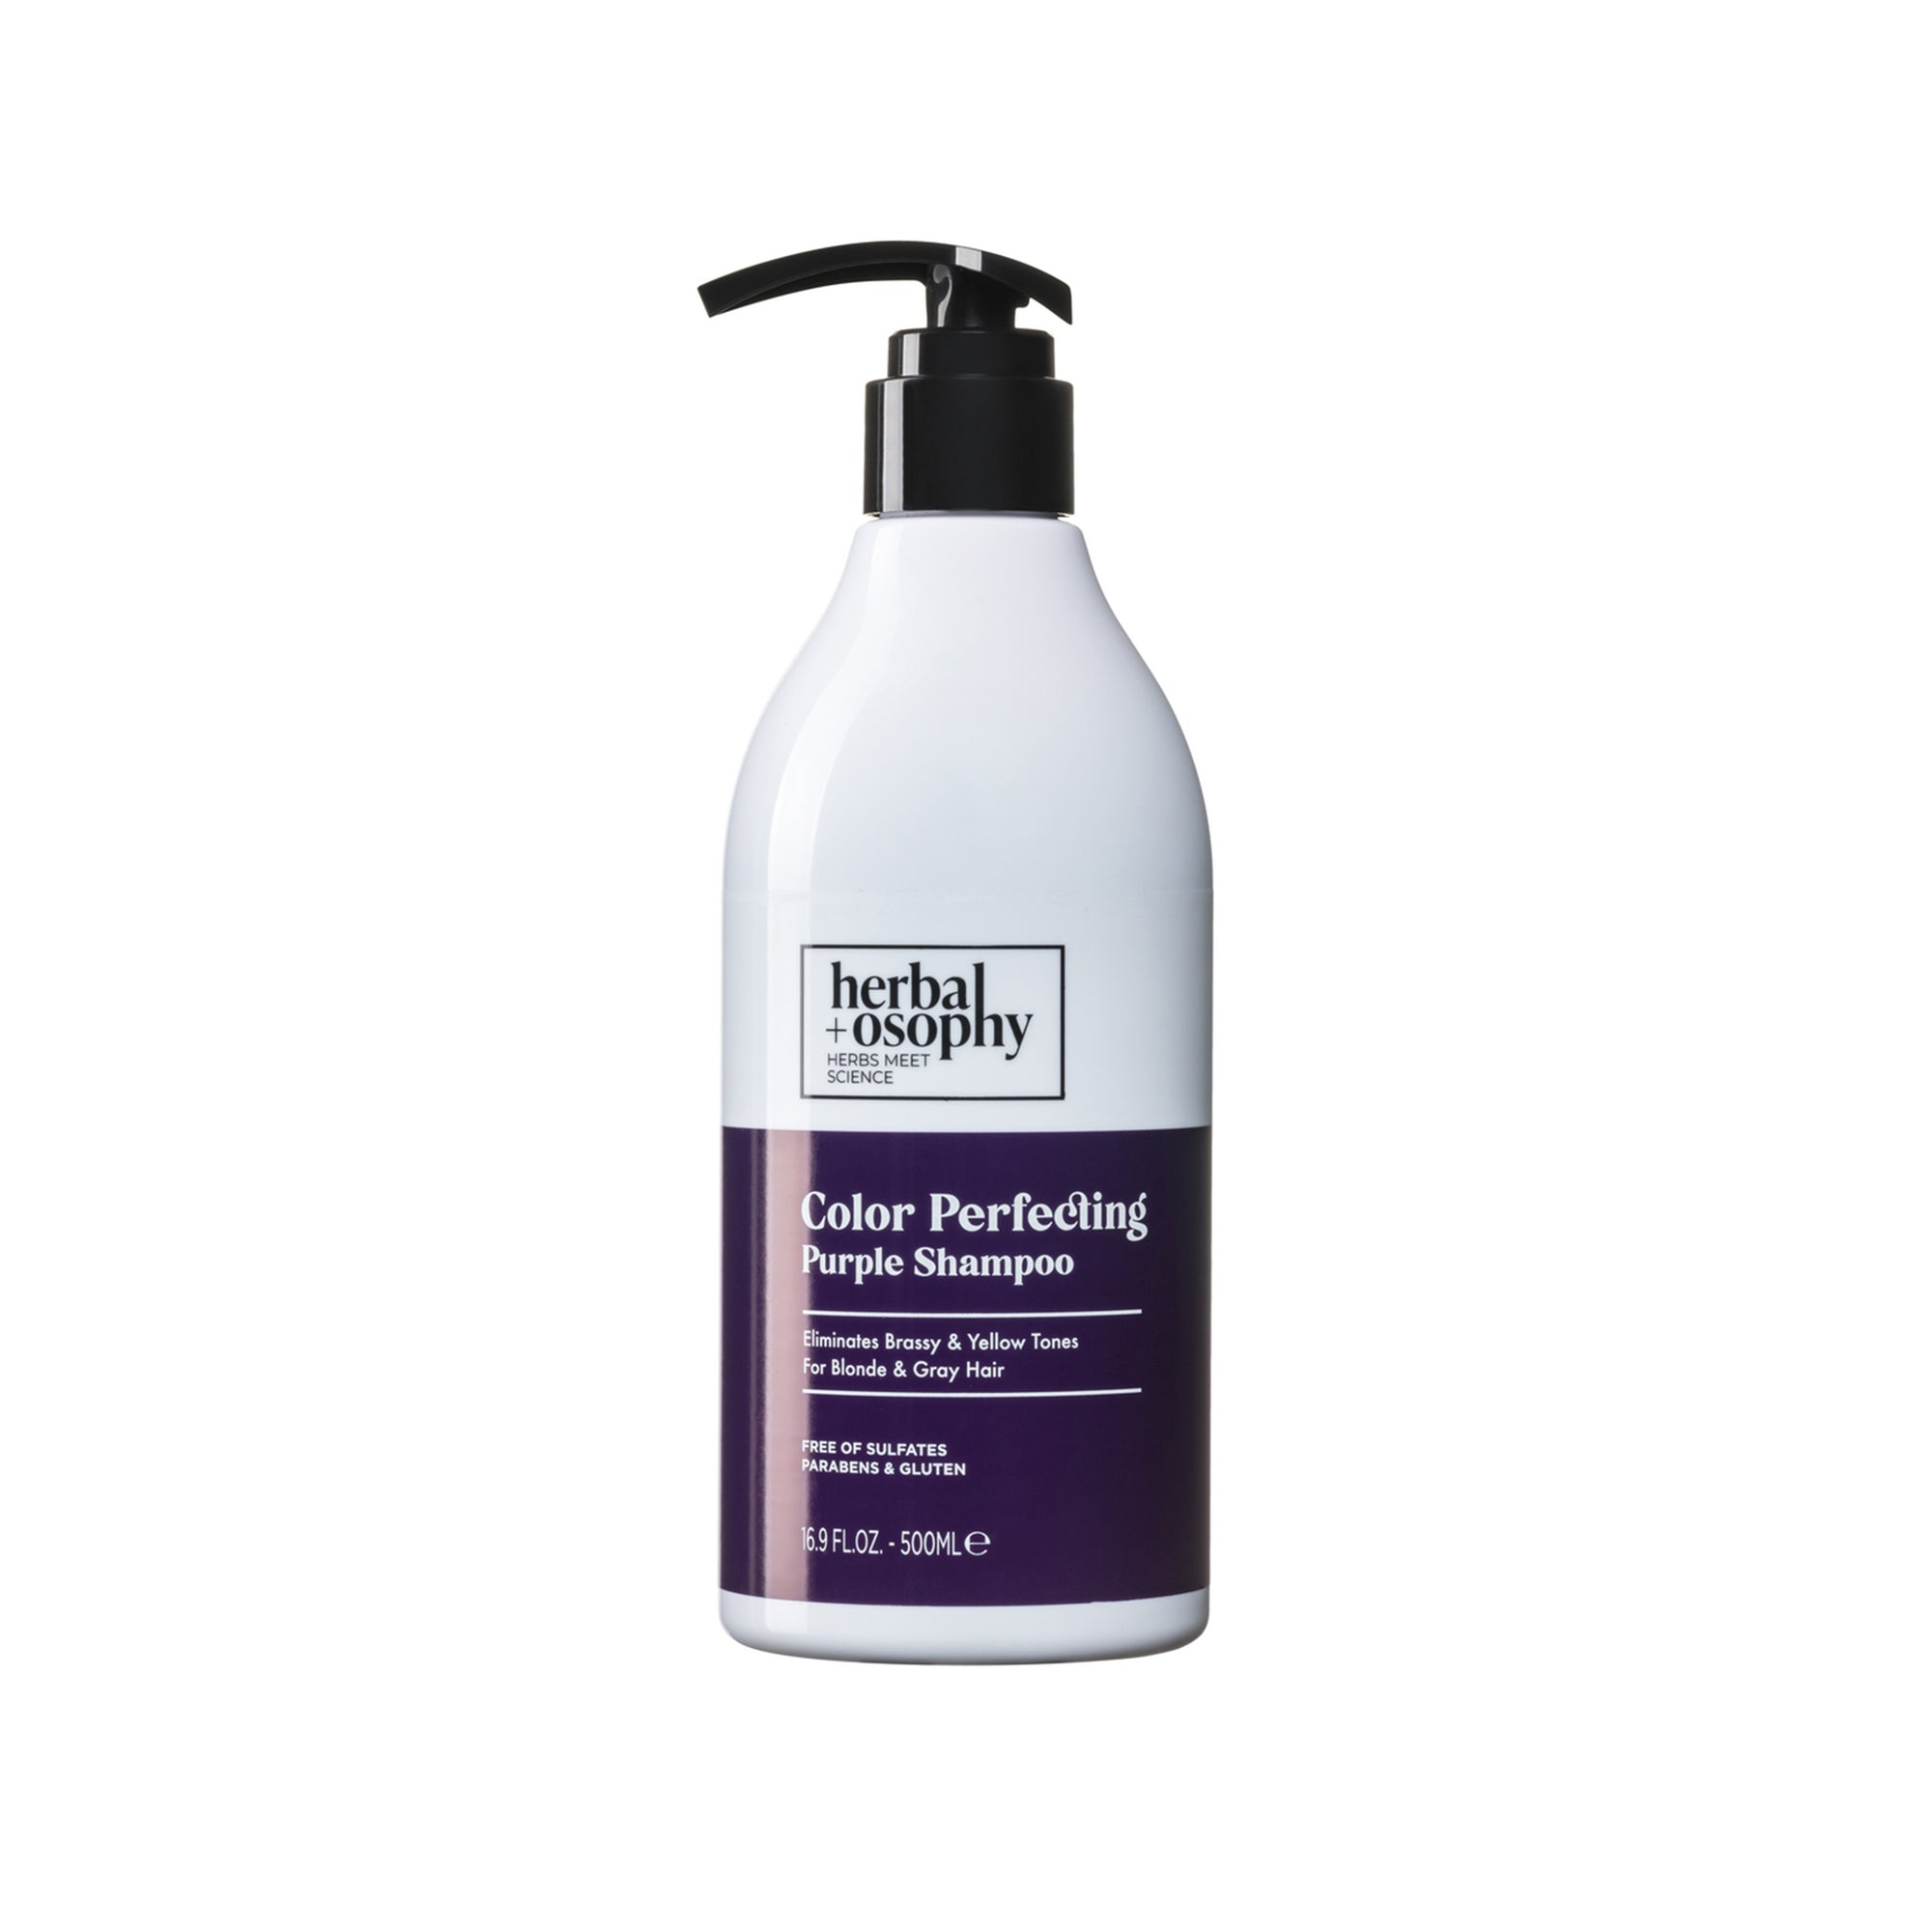 Herbalosophy Color Perfecting Purple Shampoo bottle front